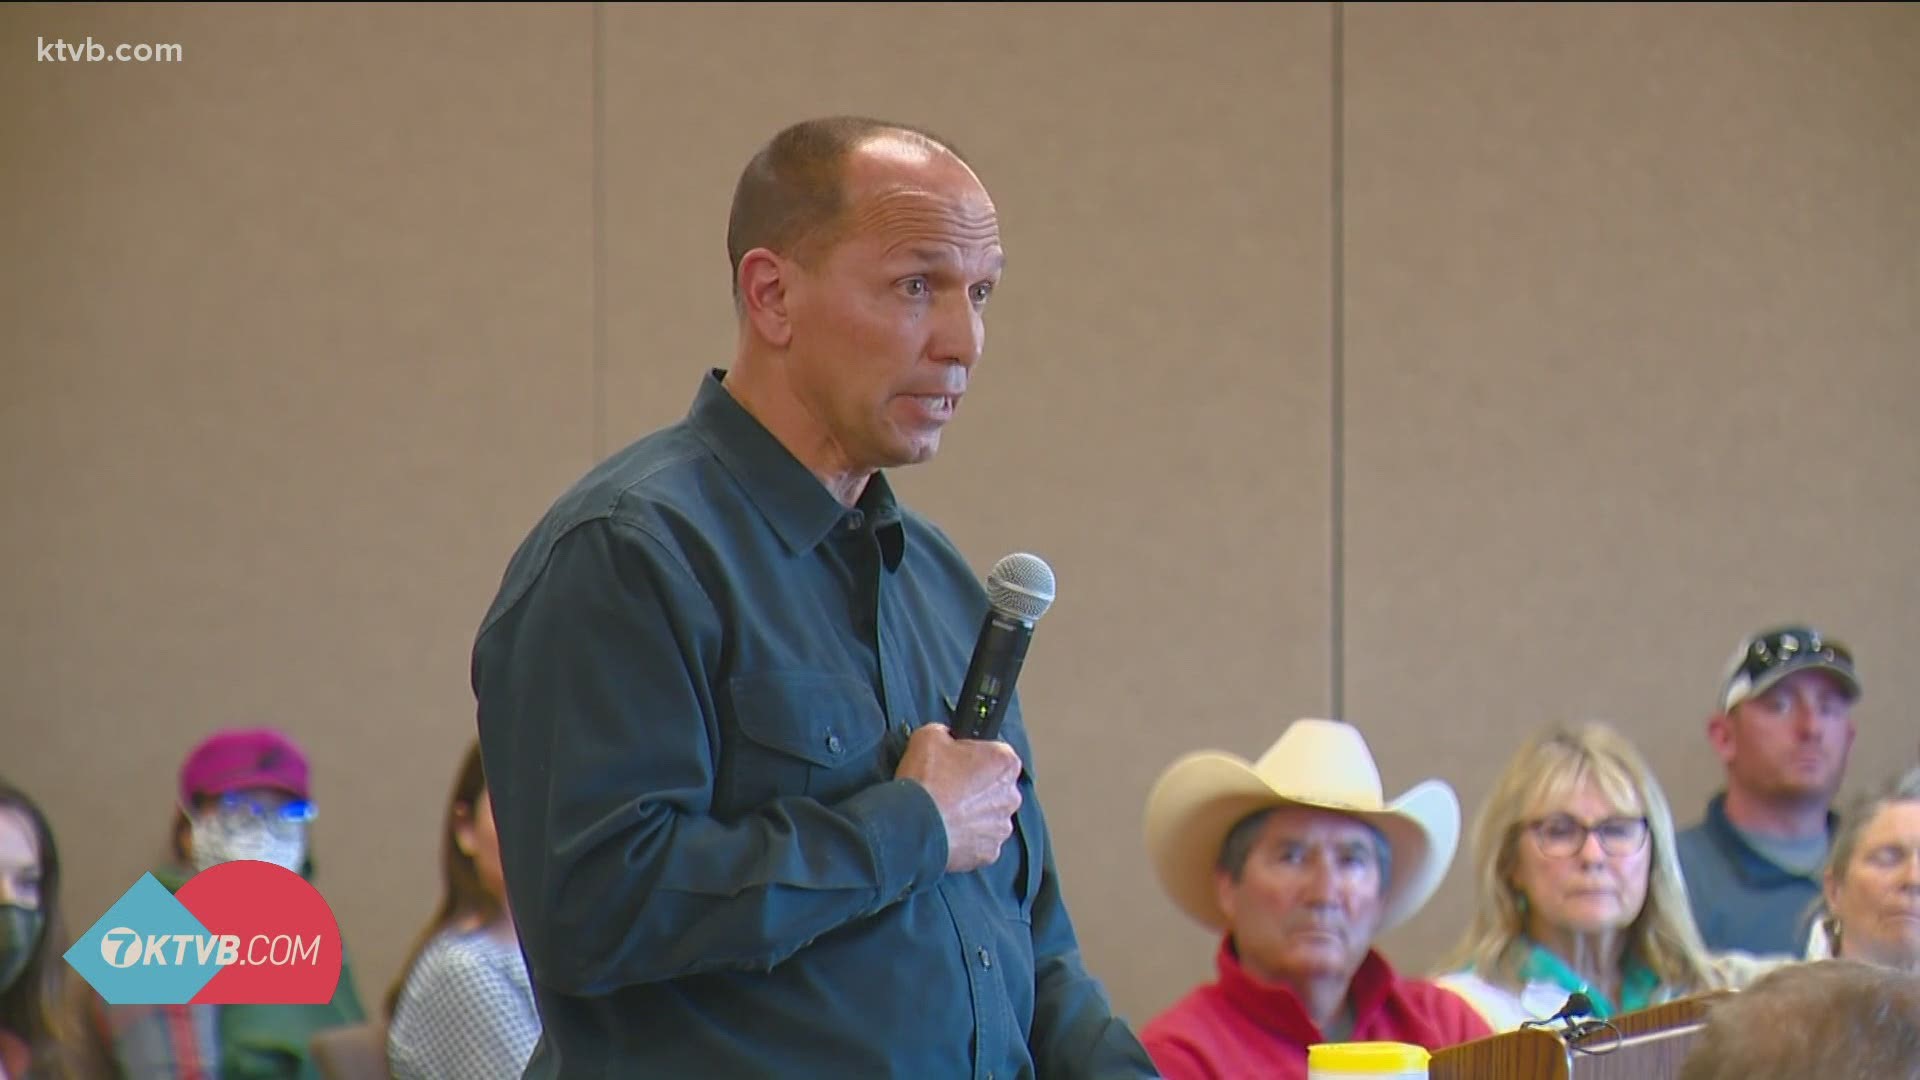 Michael Boren says he uses his aircraft as a part of his ranching operation and to get to and from his property, he says much like other Idaho ranchers.